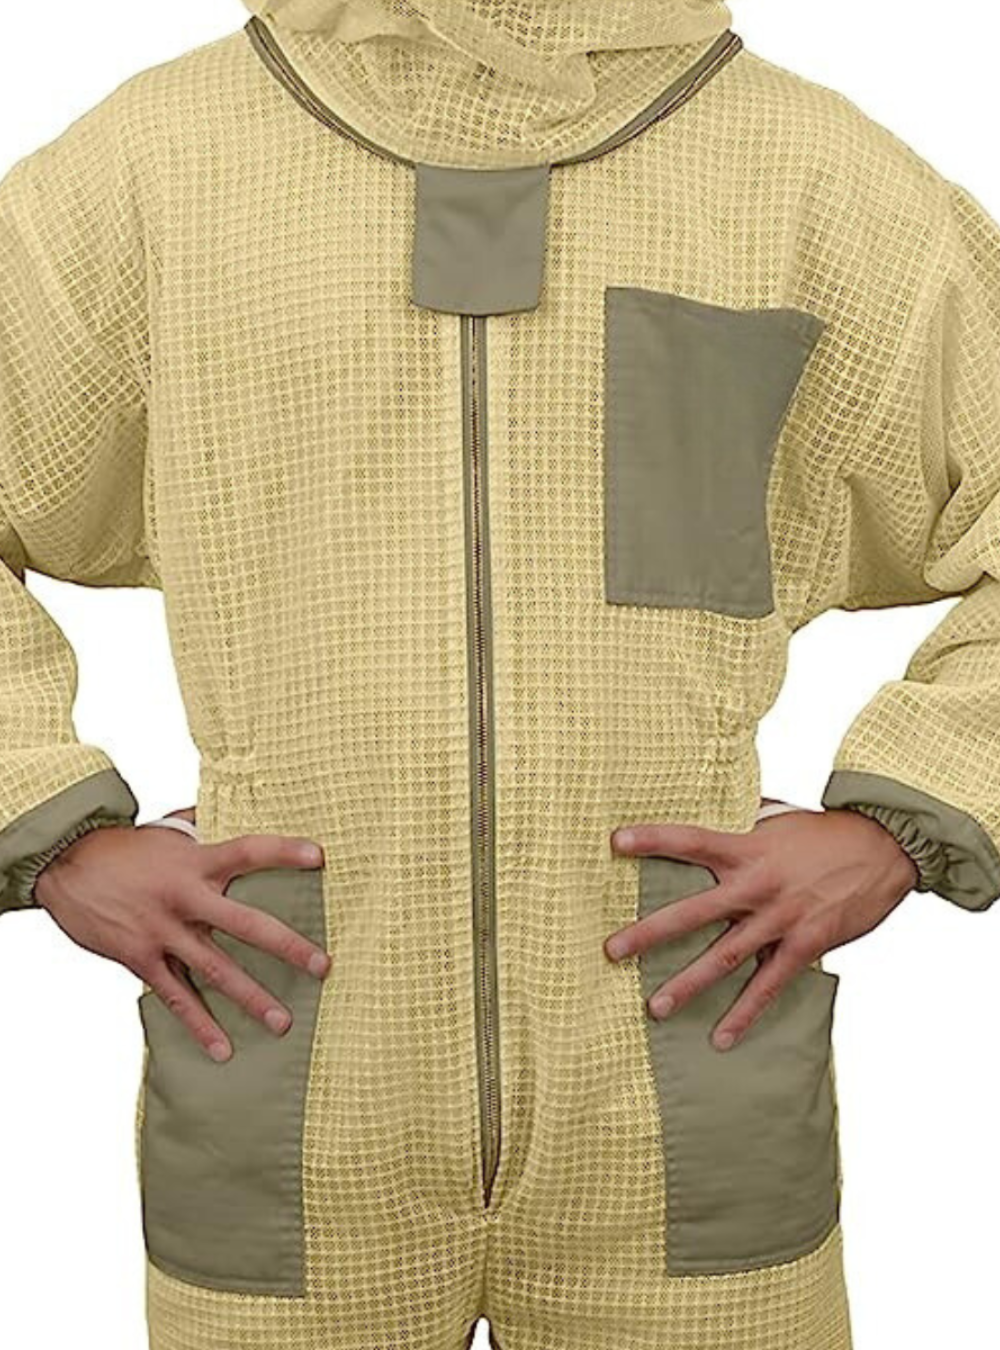 Closeup of Sting Prof Beekeeping Suit featuring multiple pockets, elastic cuff insuring your ease during Beekeeping tasks.